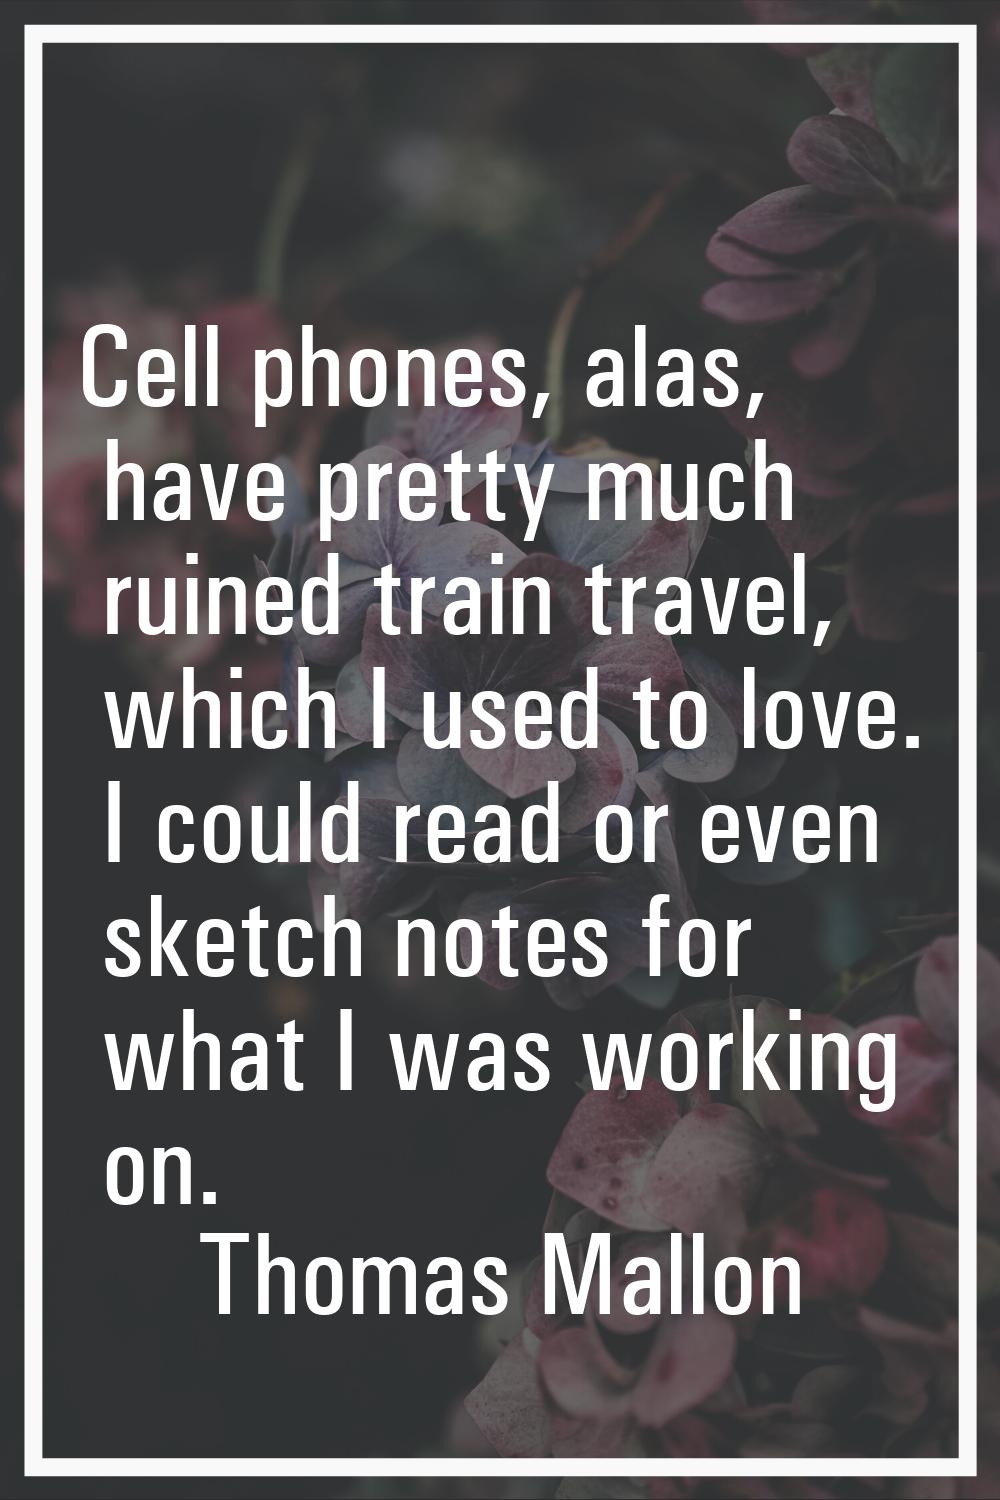 Cell phones, alas, have pretty much ruined train travel, which I used to love. I could read or even